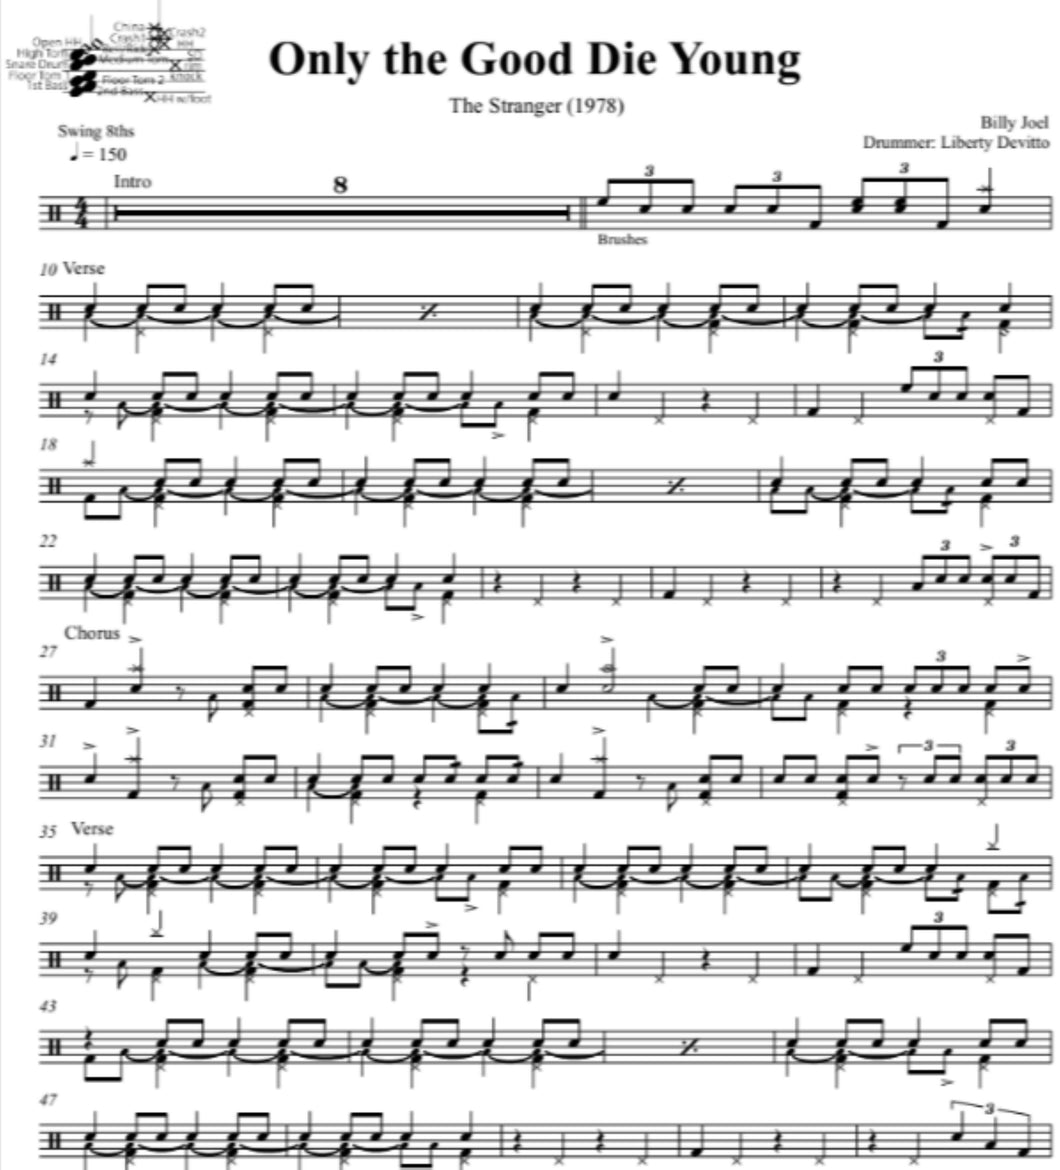 Only the Good Die Young - Billy Joel - Full Drum Transcription / Drum Sheet Music - DrumSetSheetMusic.com